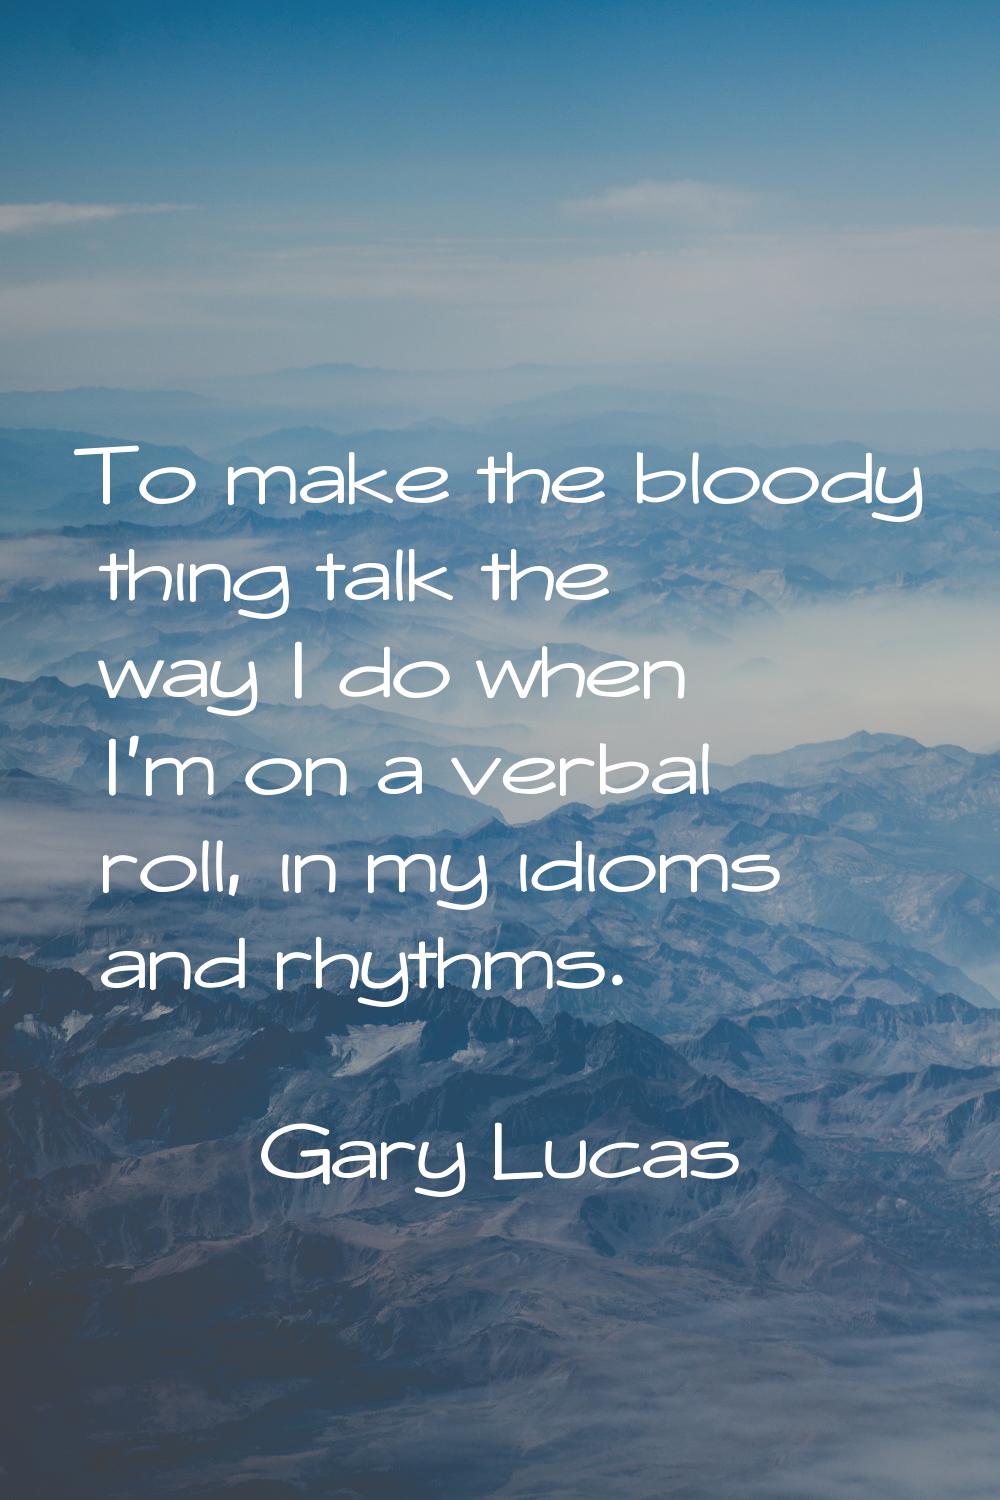 To make the bloody thing talk the way I do when I'm on a verbal roll, in my idioms and rhythms.